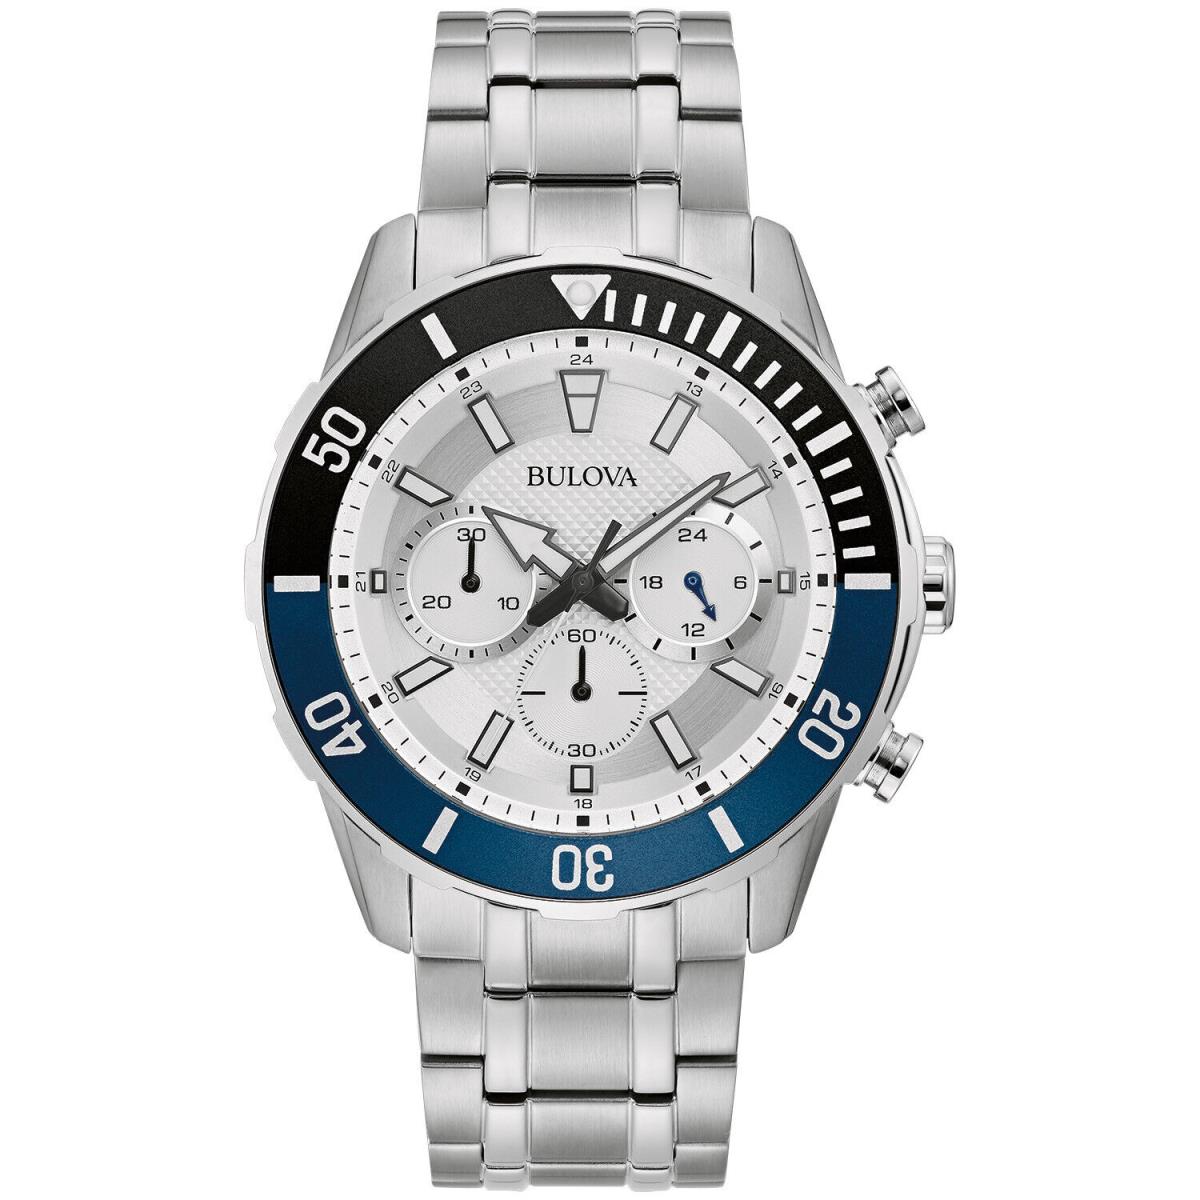 Men`s Bulova Stainless Steel Chronograph Silver White Dial Dress Watch - 98A257 - Silver Dial, Silver Band, Silver Bezel